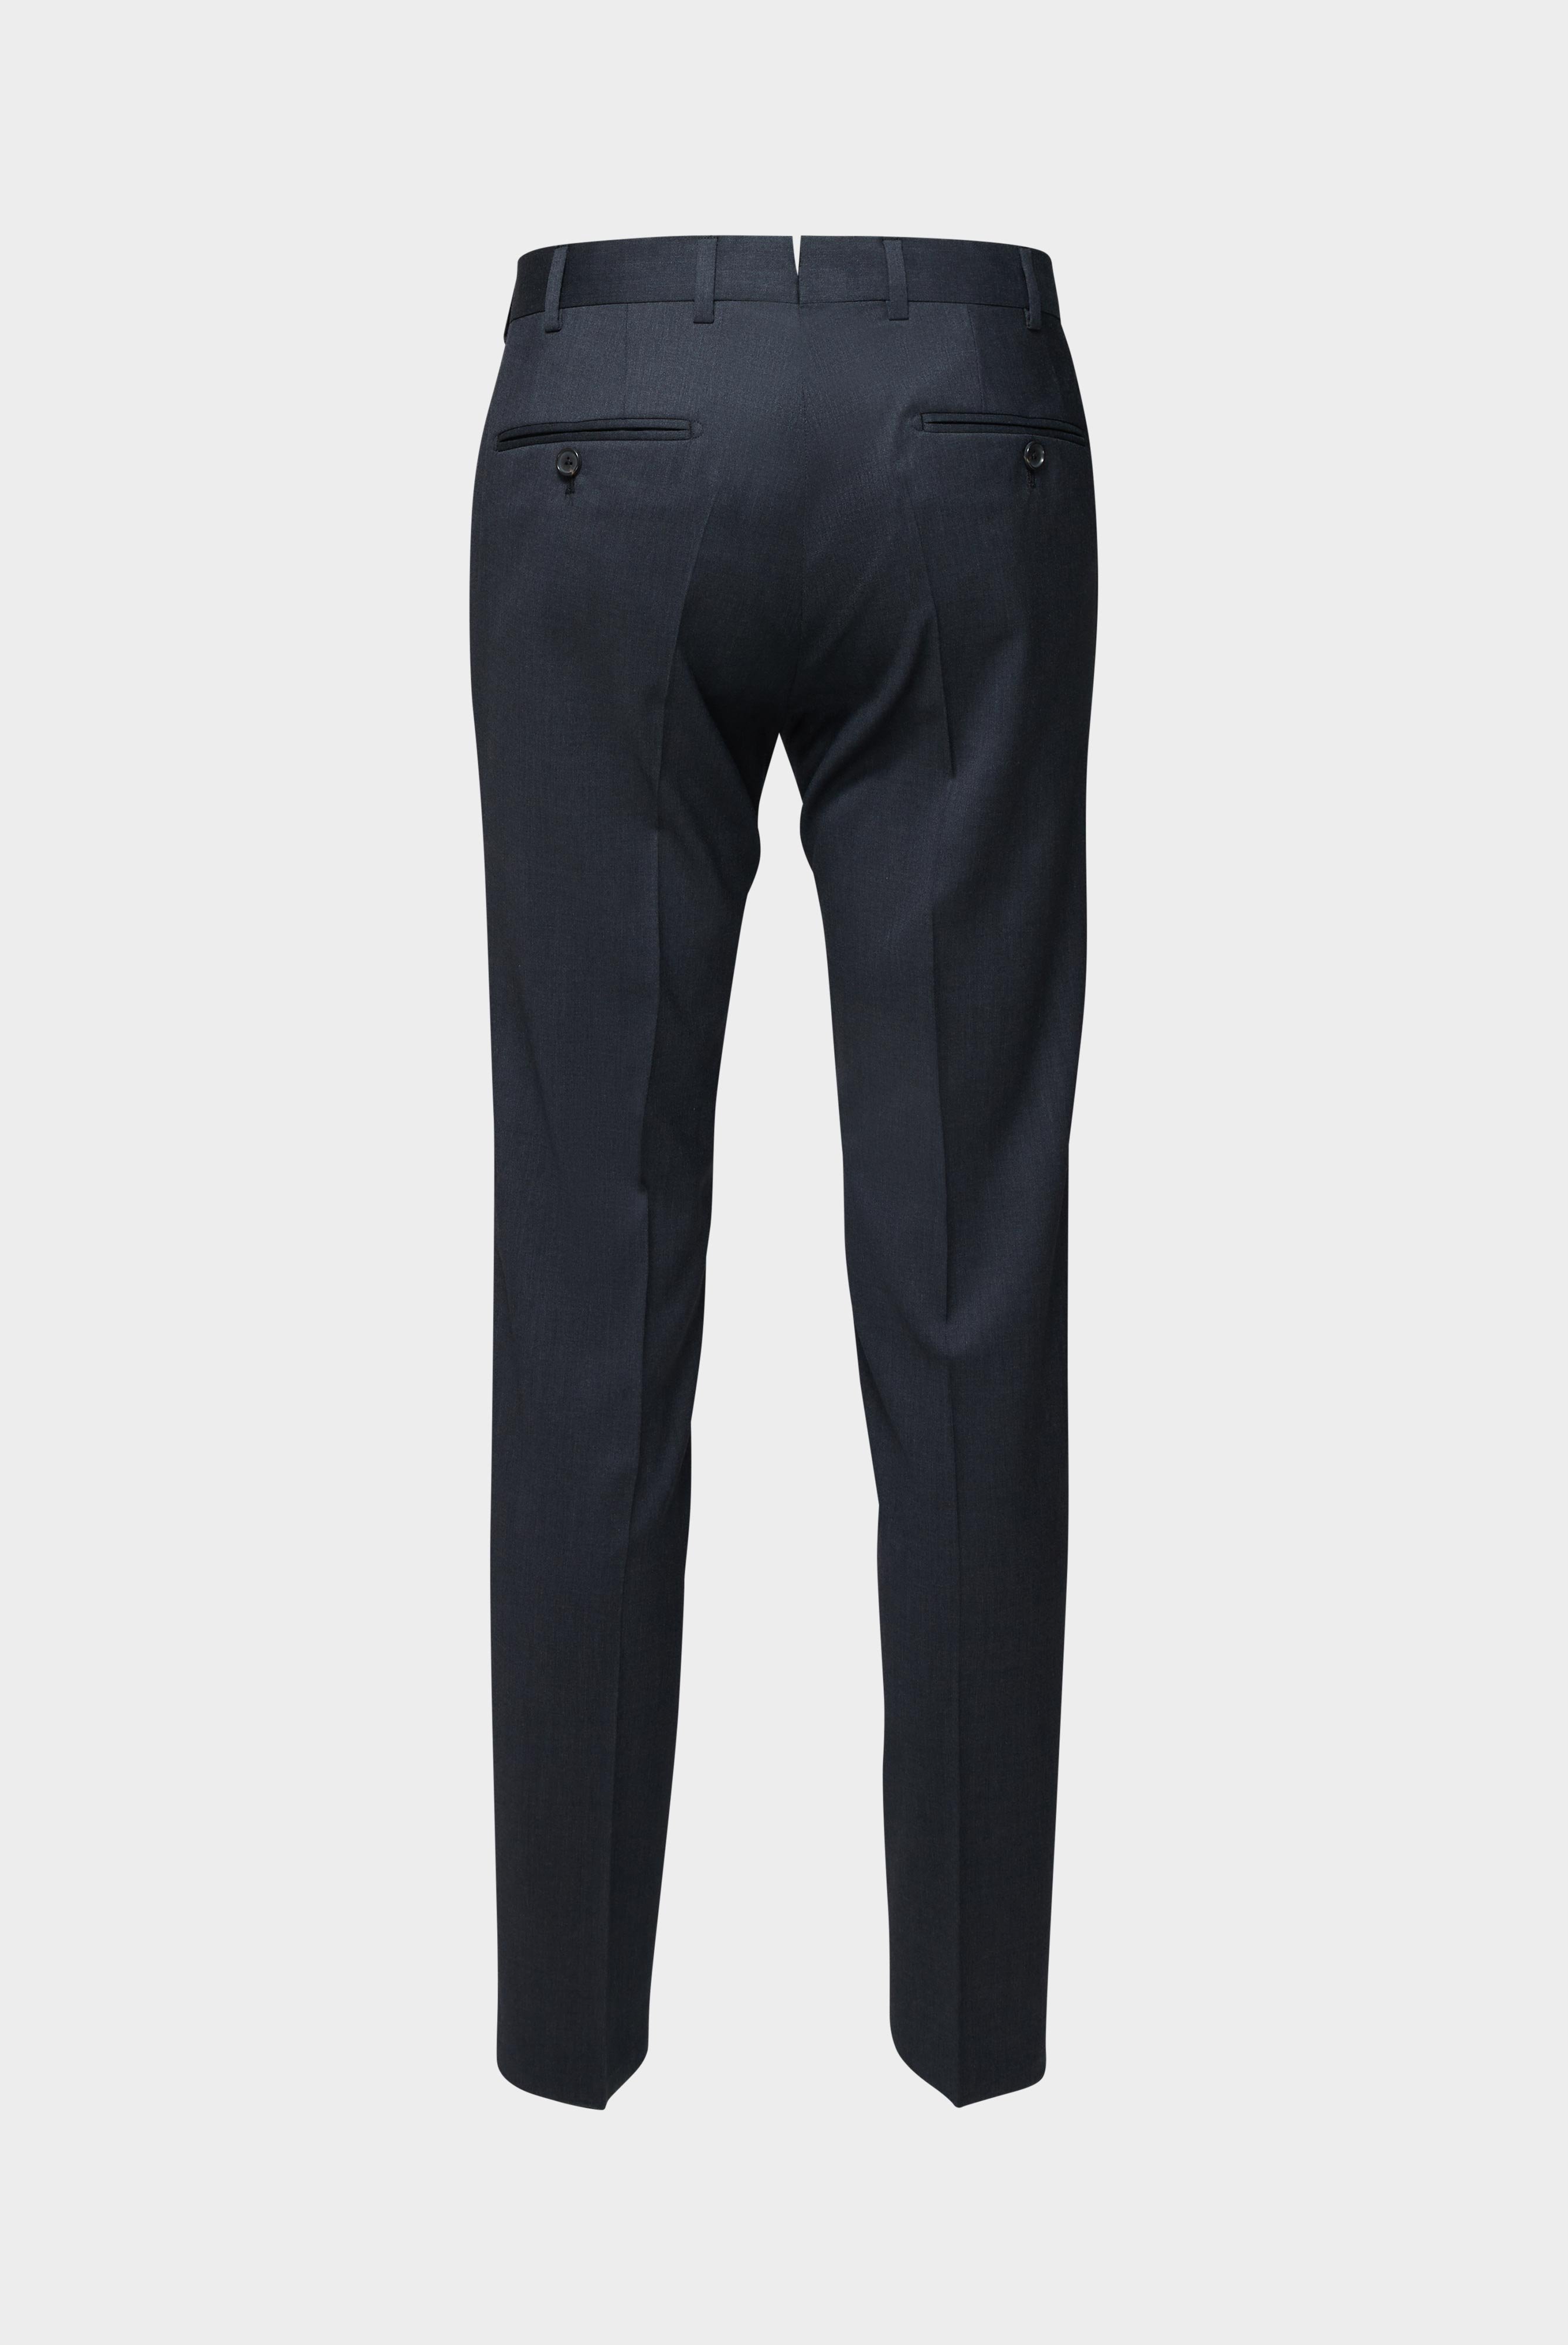 Jeans & Trousers+Wool Trousers Slim Fit+20.7880.16.H01010.090.50